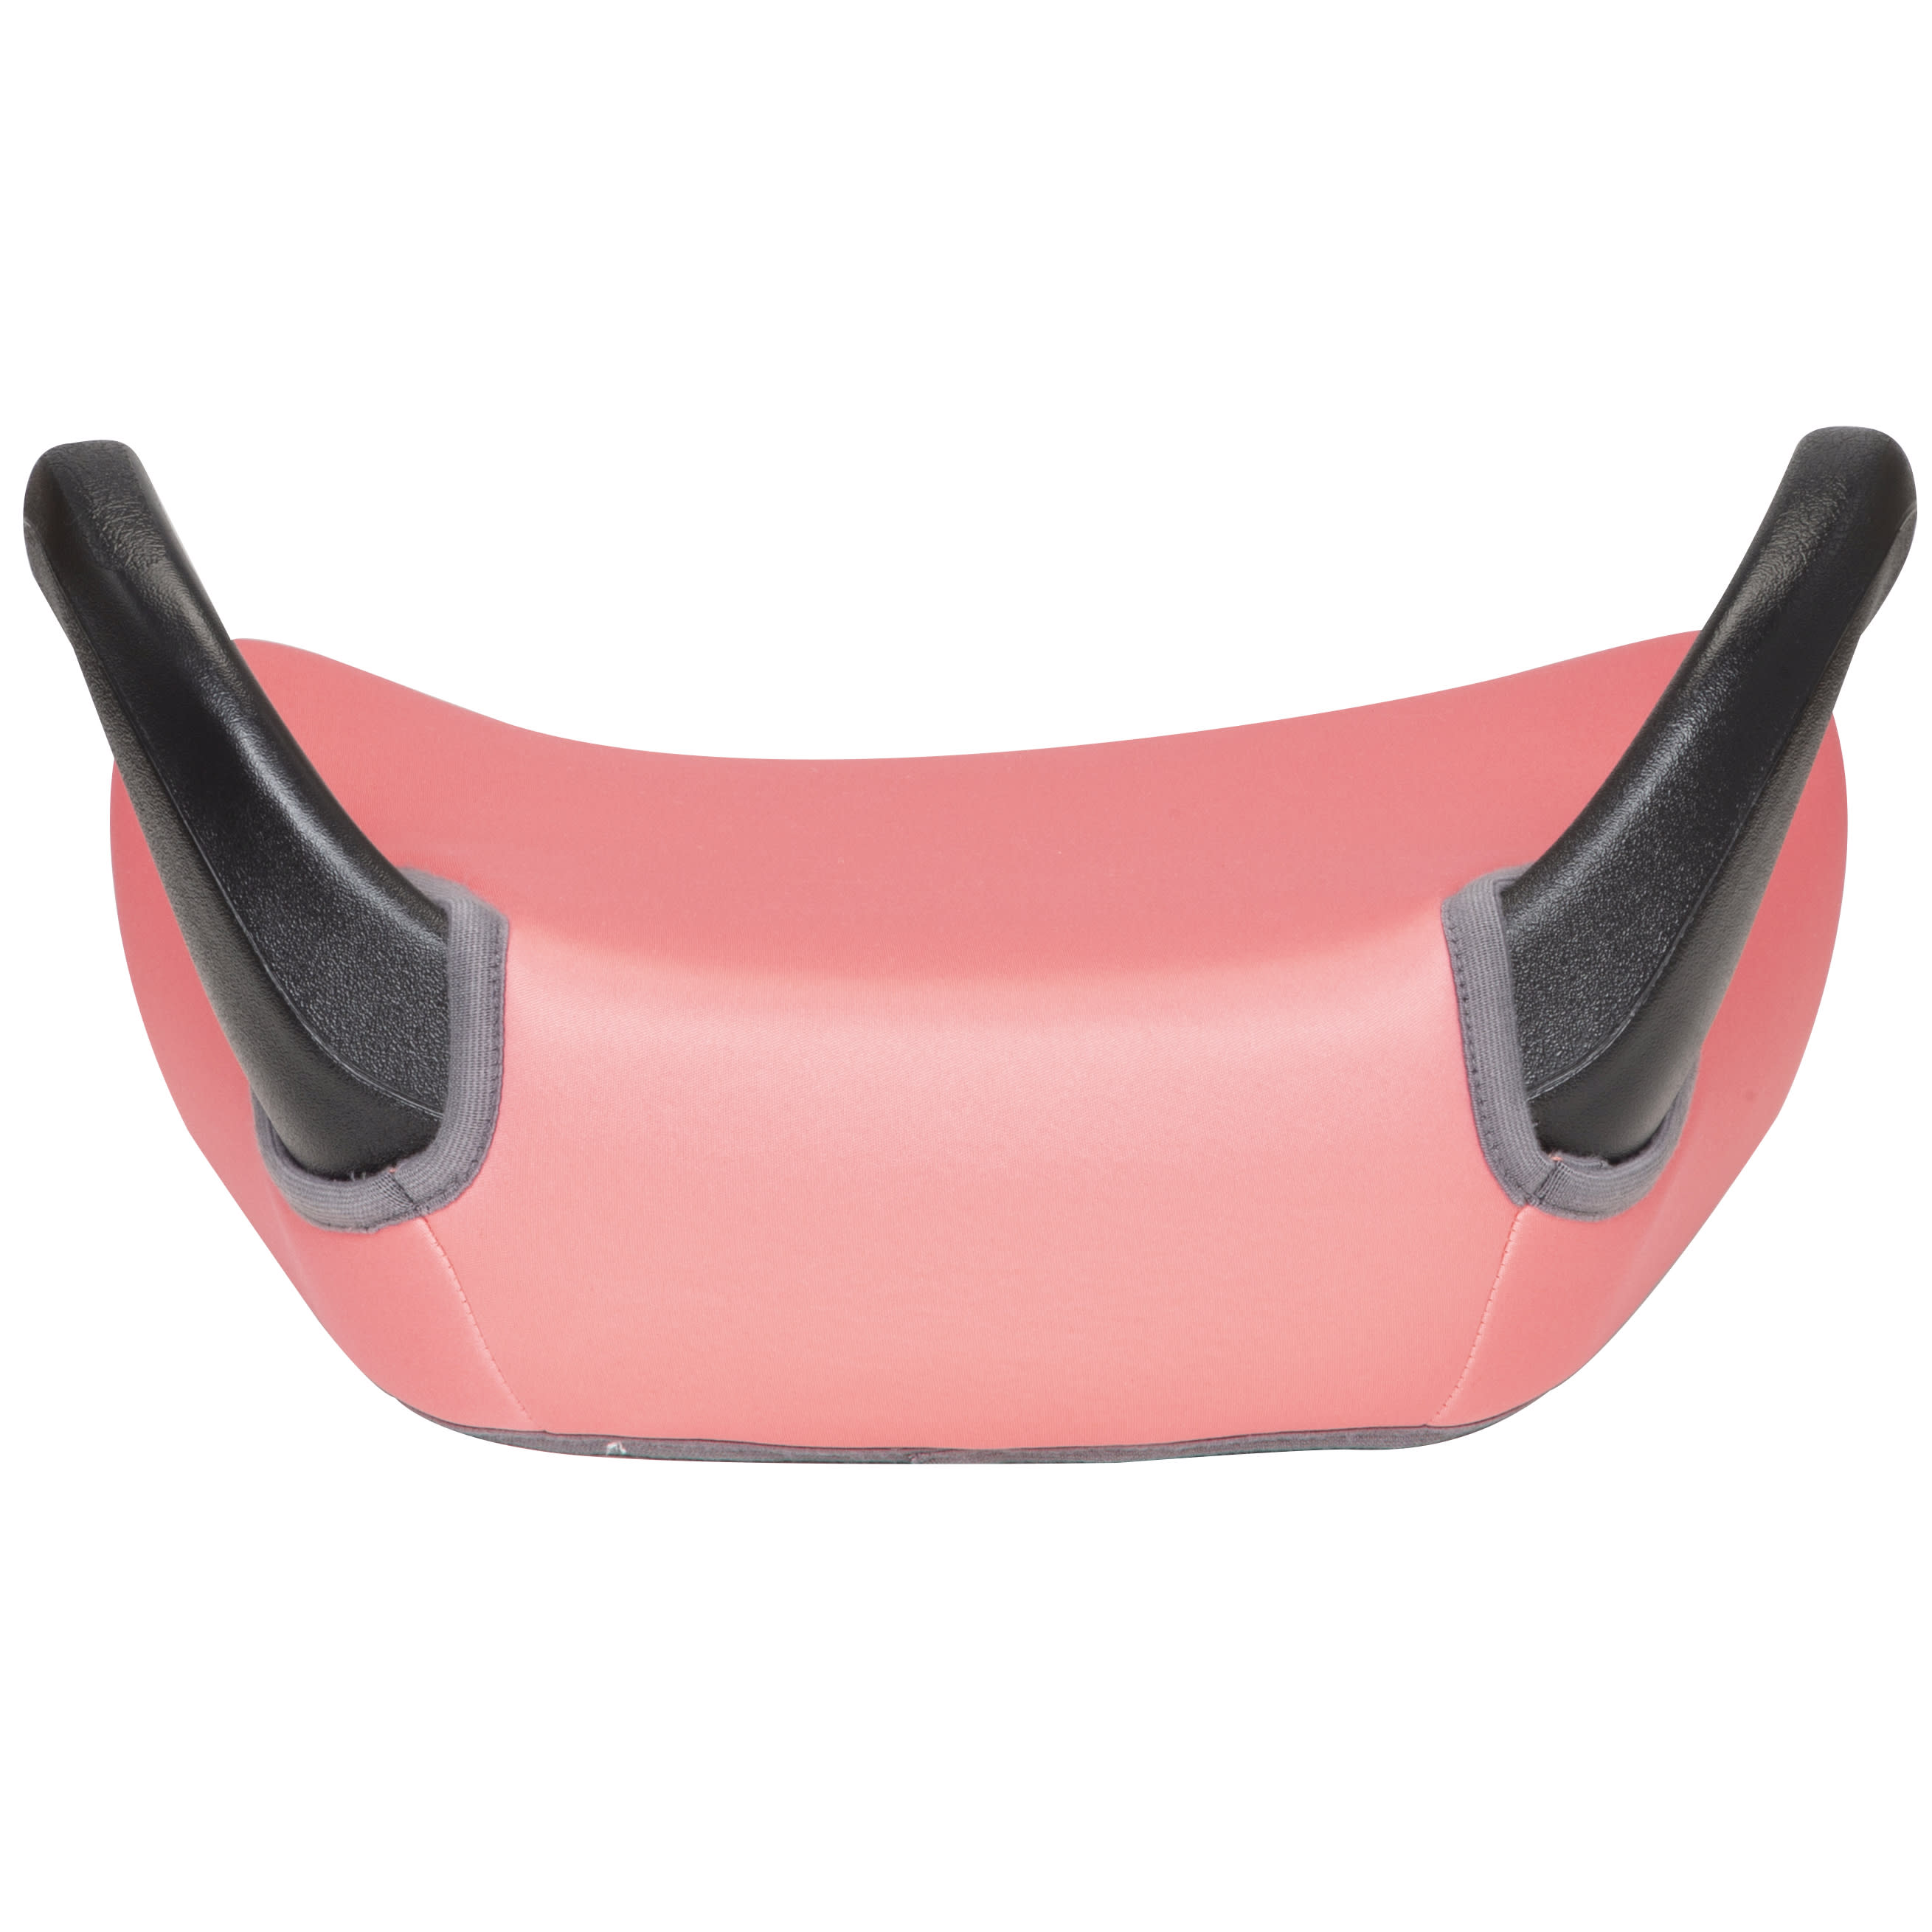 Cosco Rise Backless Booster Car Seat, Coral - image 3 of 16